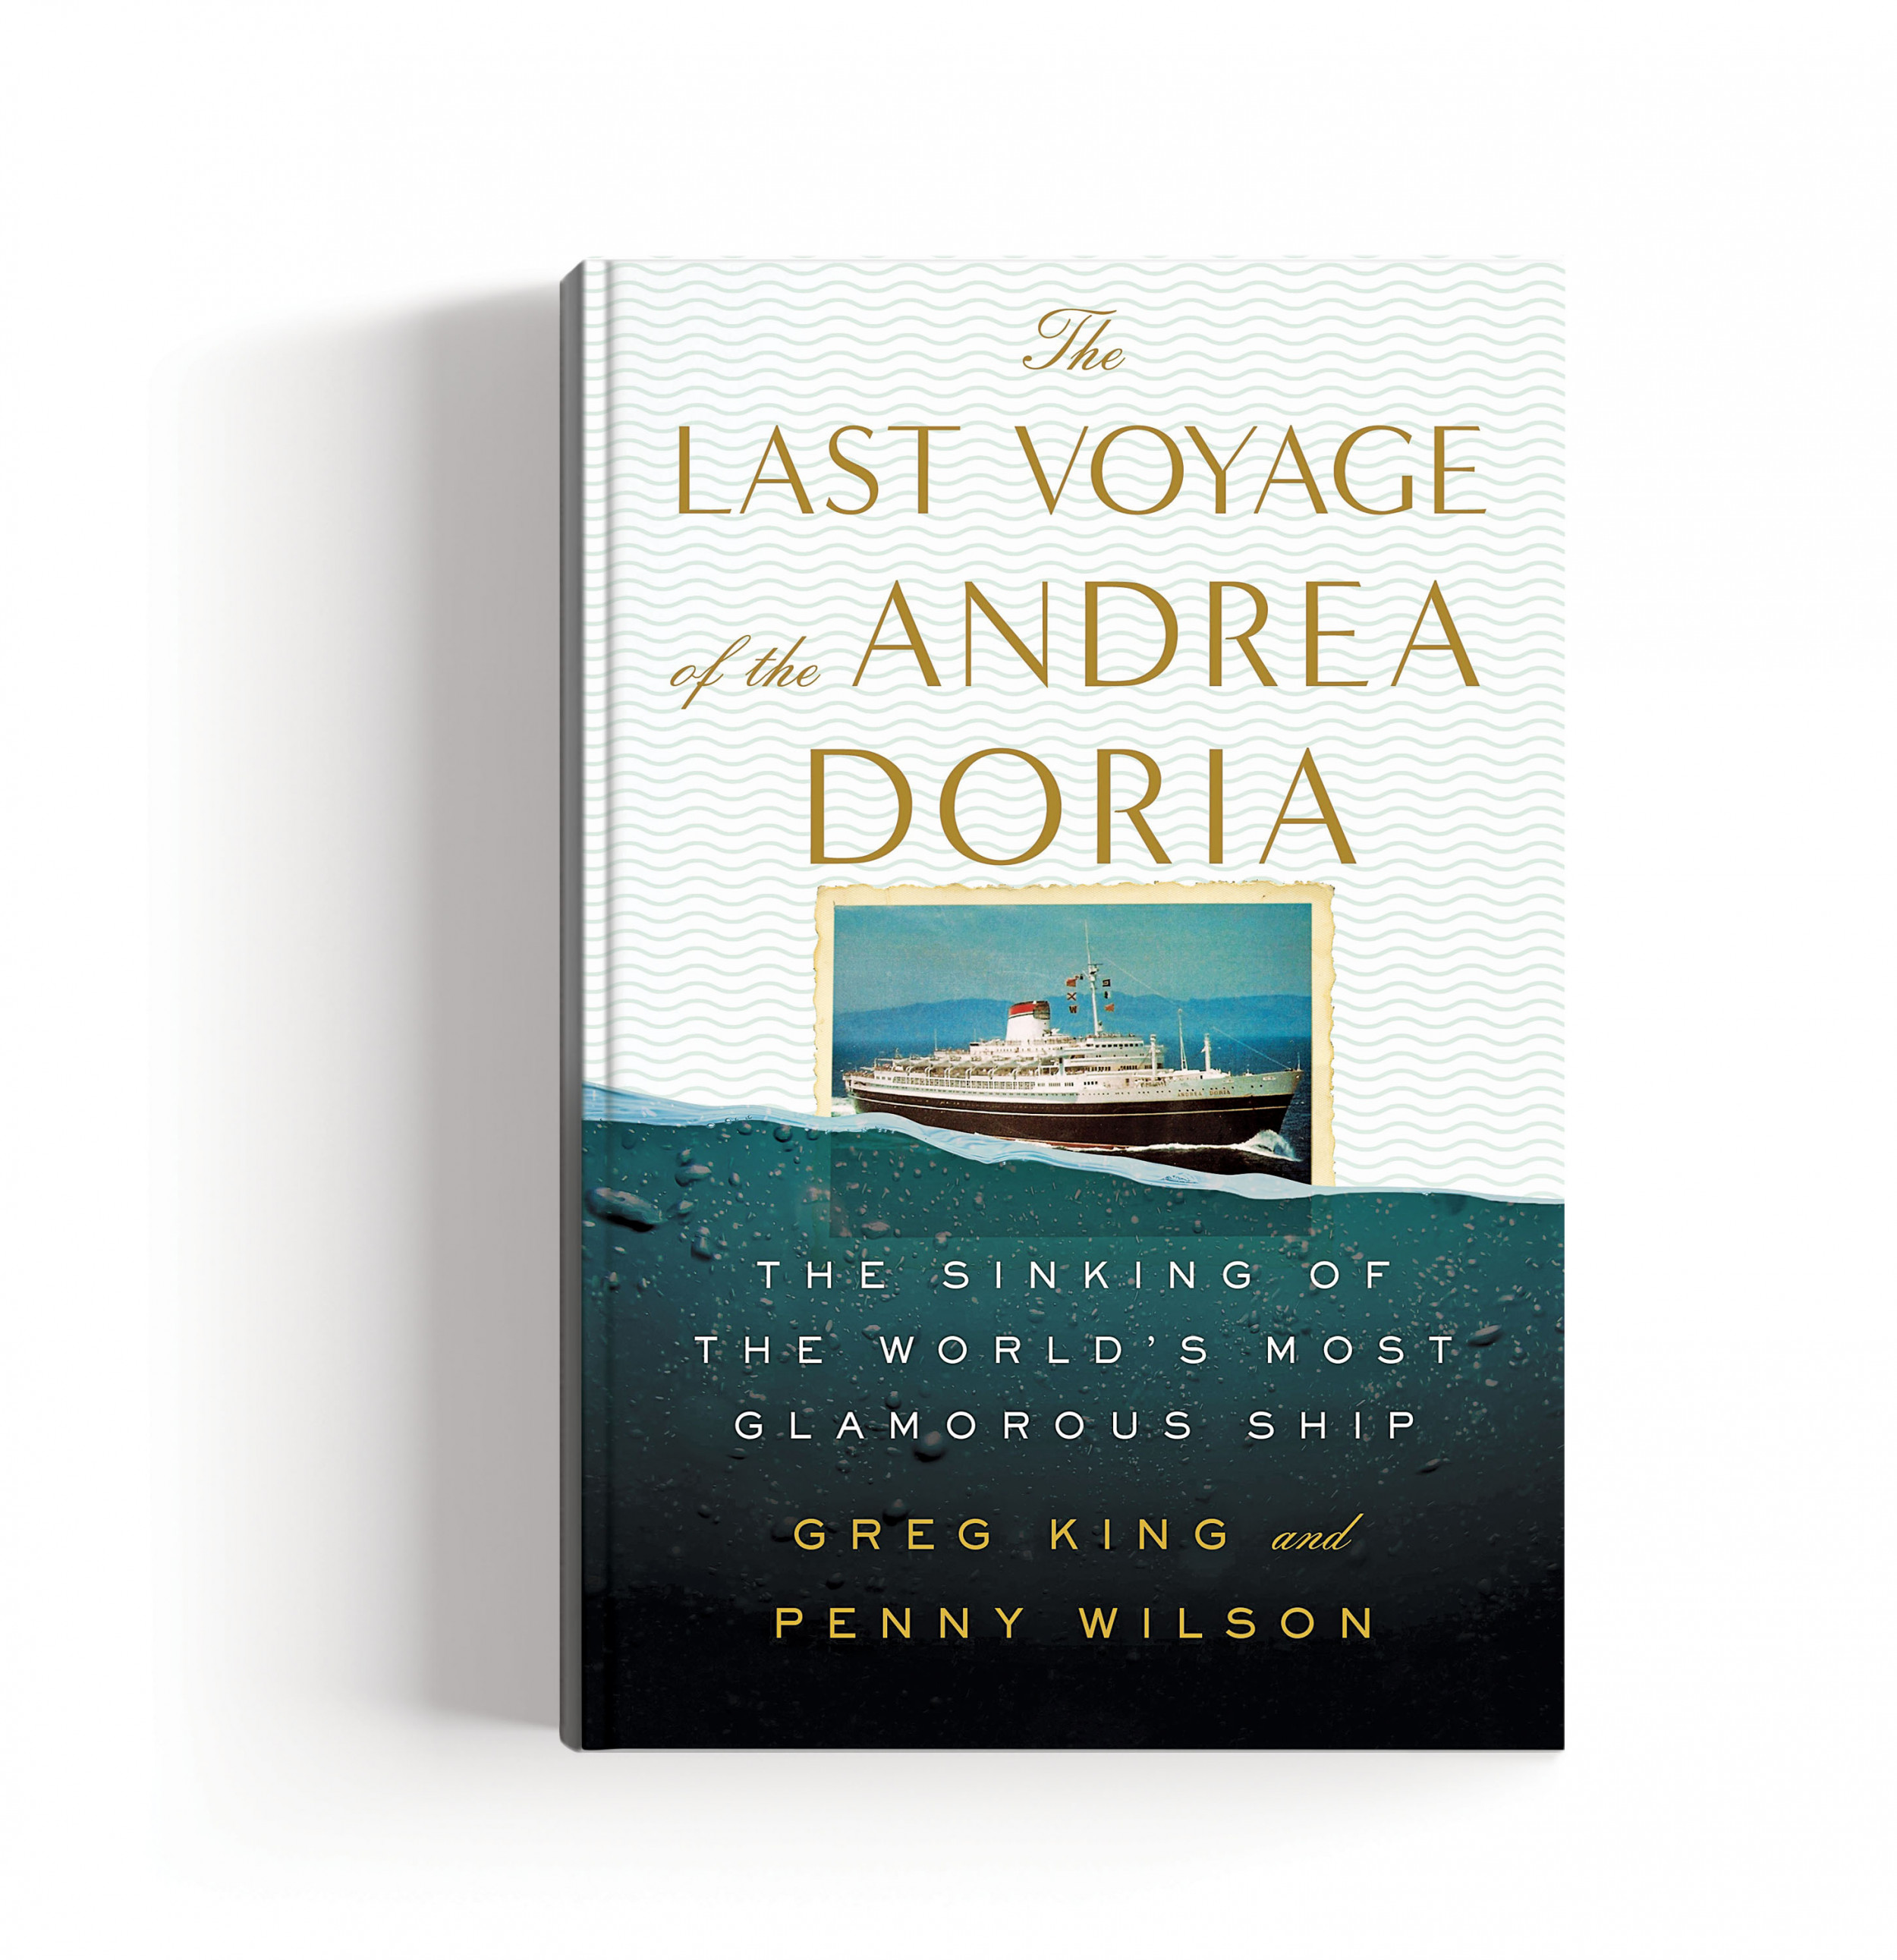 The Last Voyage of the Andrea Doria by Greg King